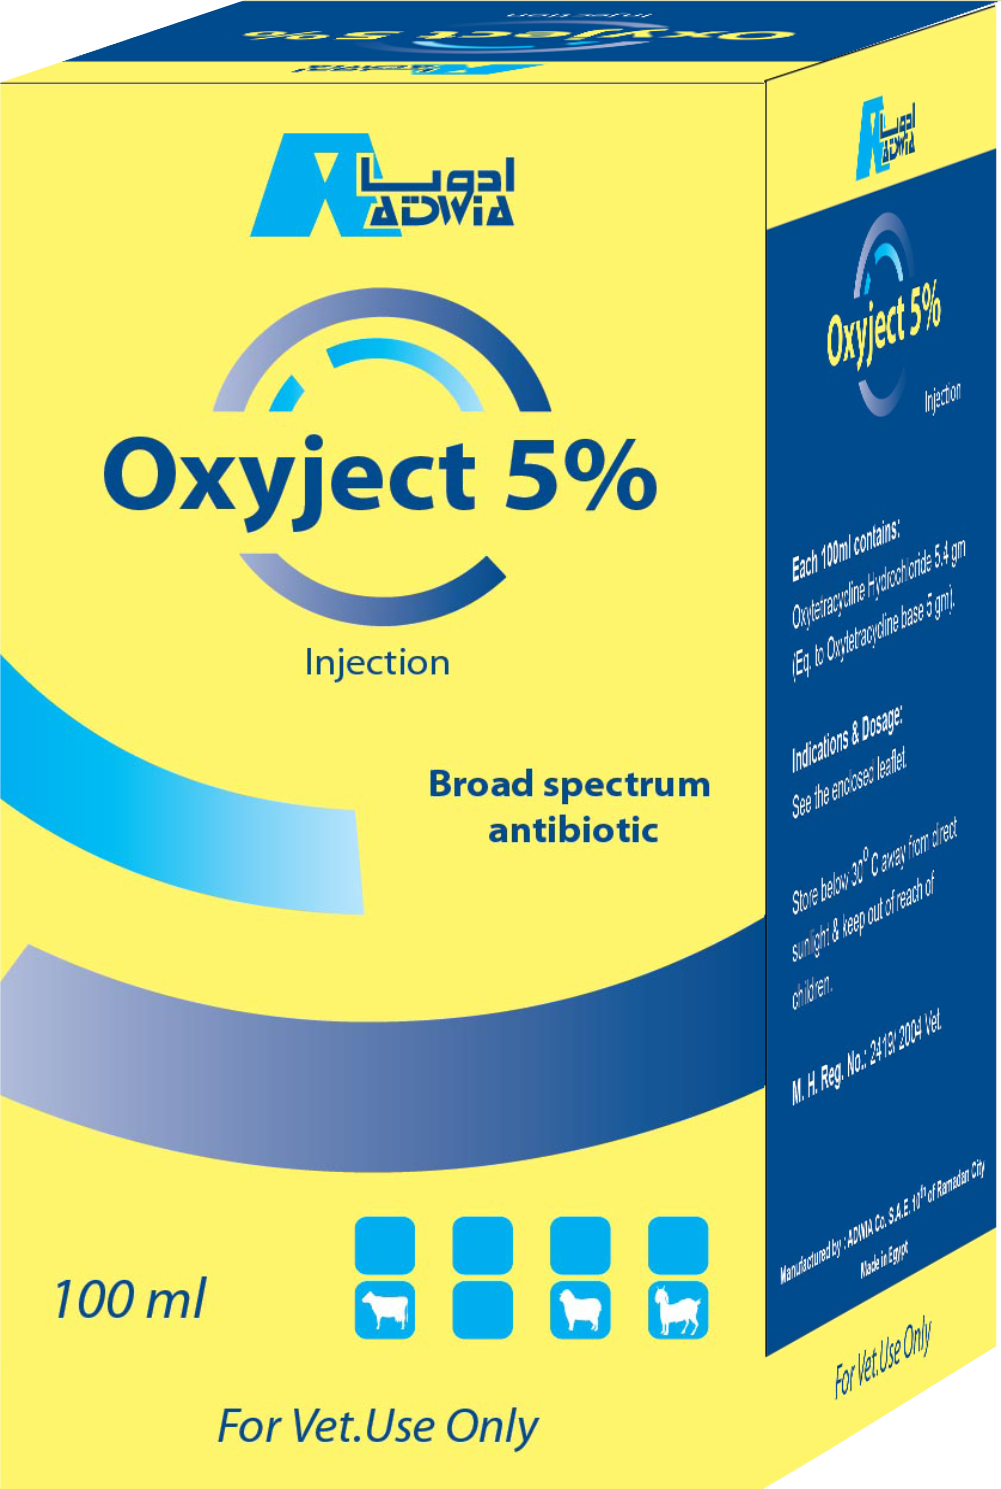 image for Oxyject 5%